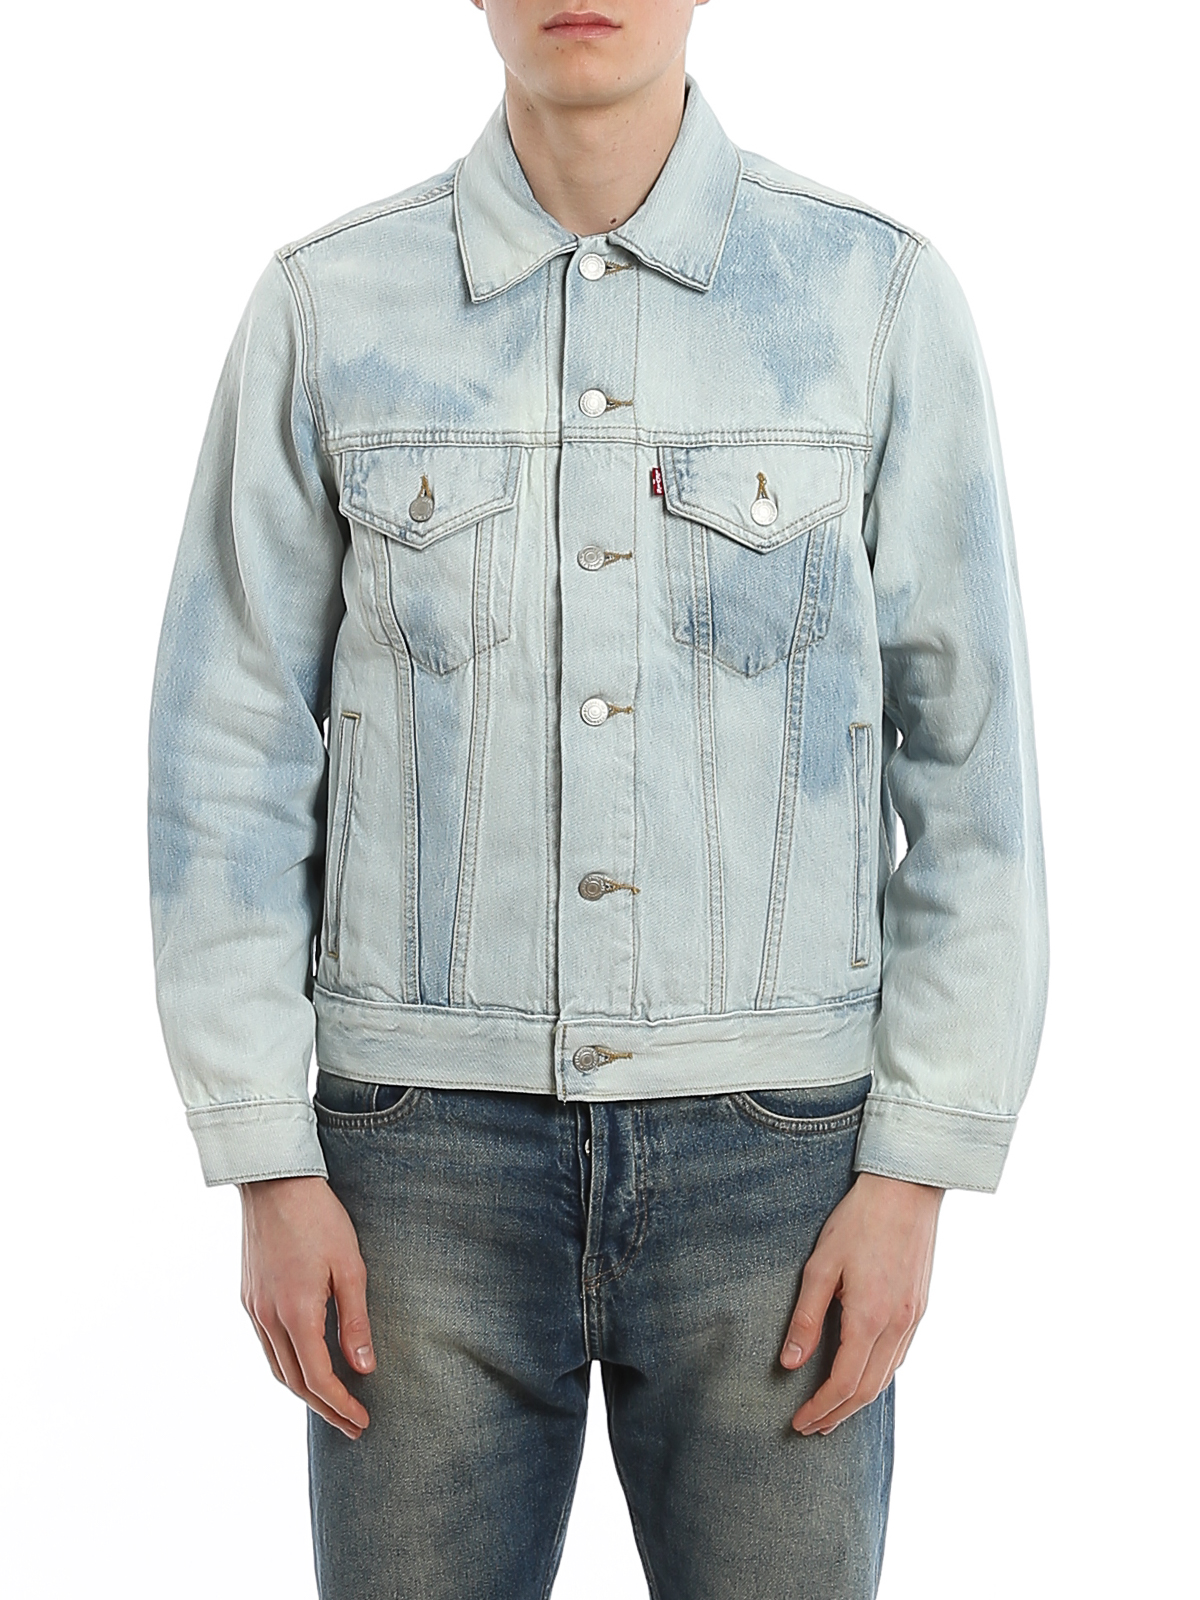 faded jeans jacket